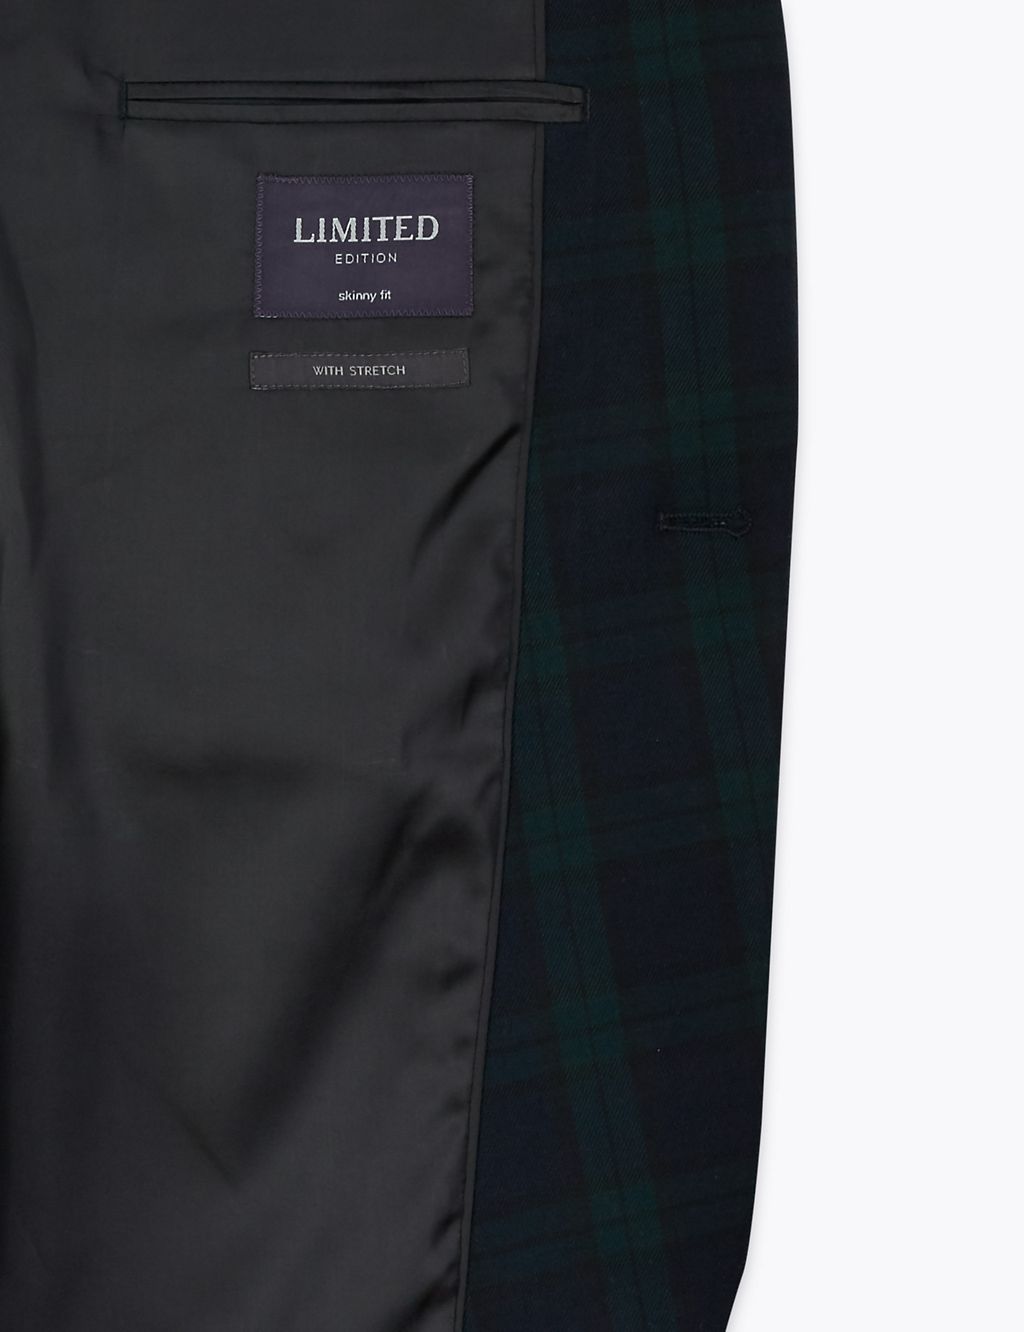 Checked Skinny Fit Jacket with Stretch 5 of 8